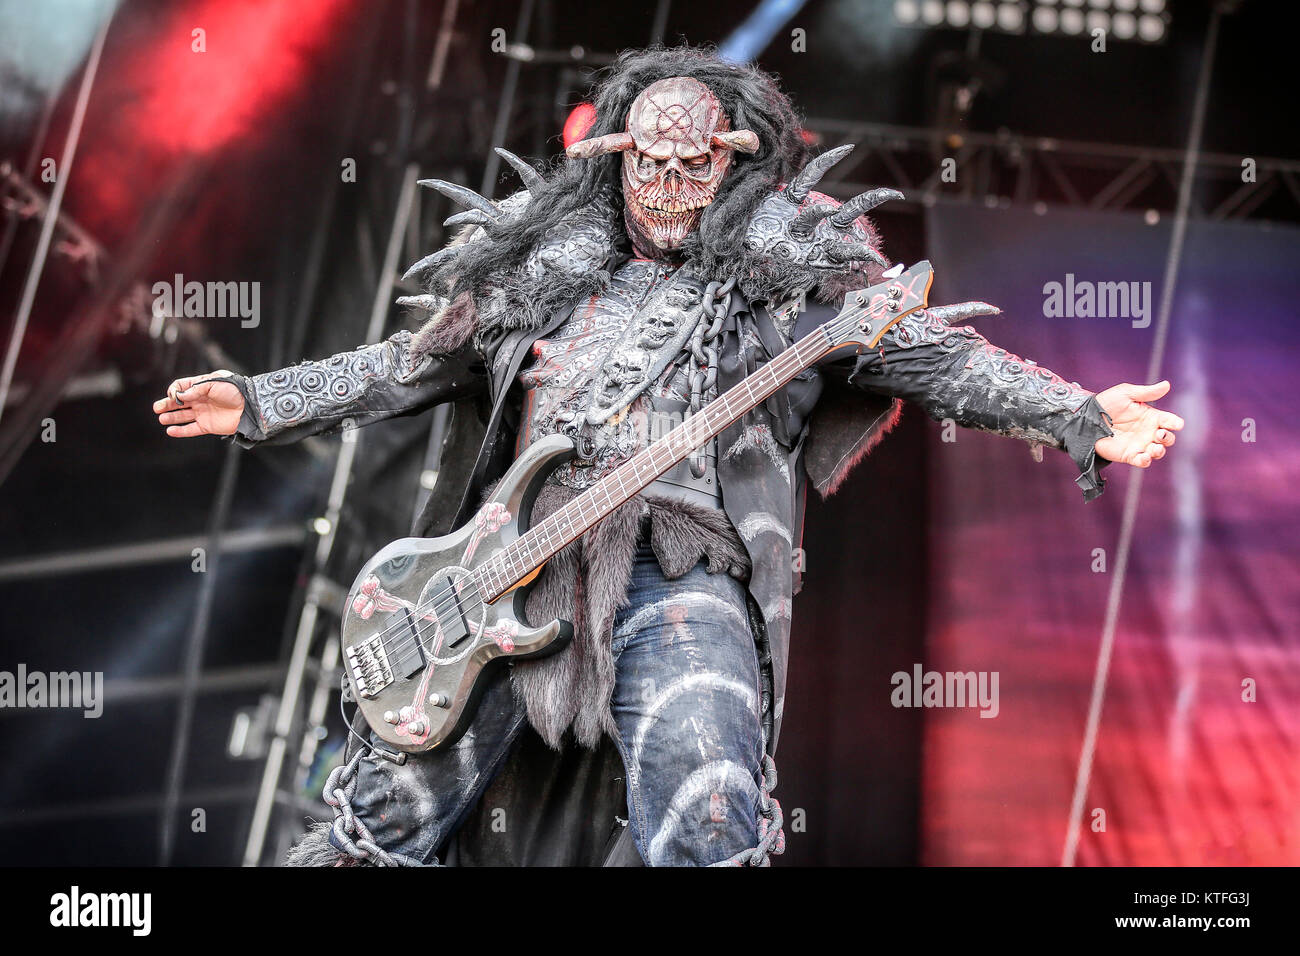 The Finnish hard rock band Lordi performs a live concert at the Swedish music festival Sweden Rock Festival 2016. Here bass player OX is seen live on stage. Sweden, 09/06 2016. Stock Photo